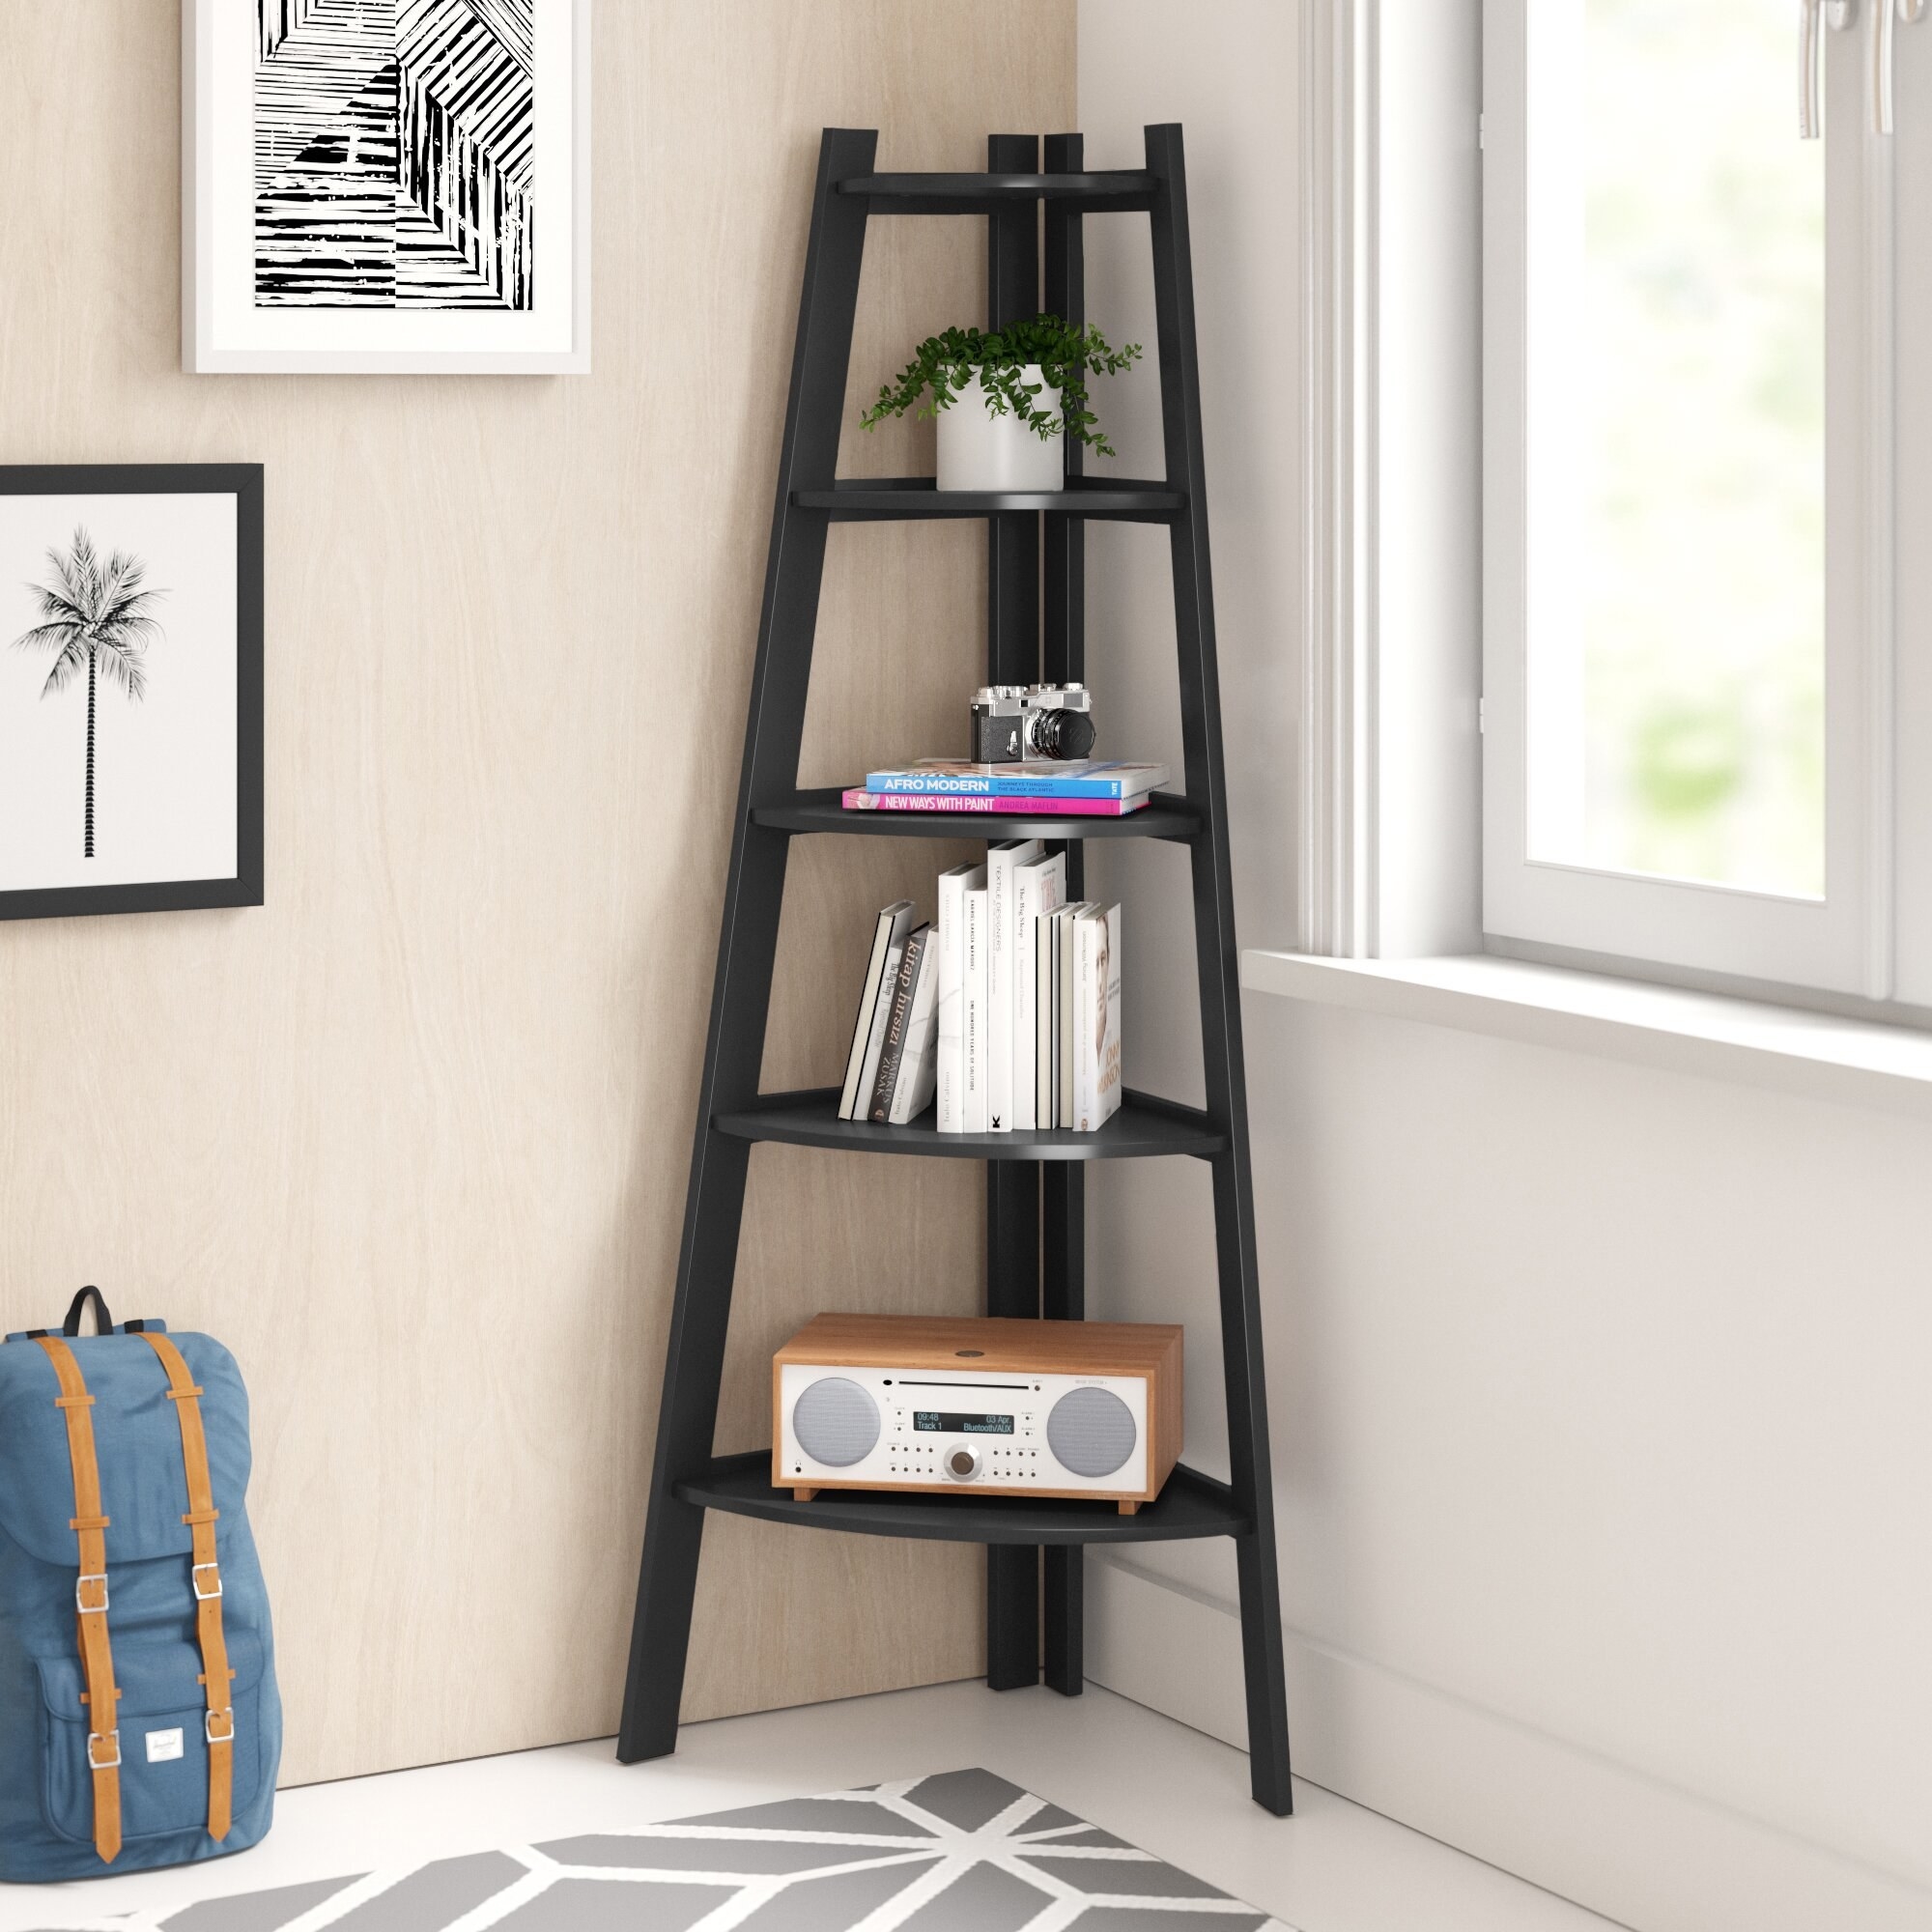 Black corner bookcase with books, a camera, radio and house plant